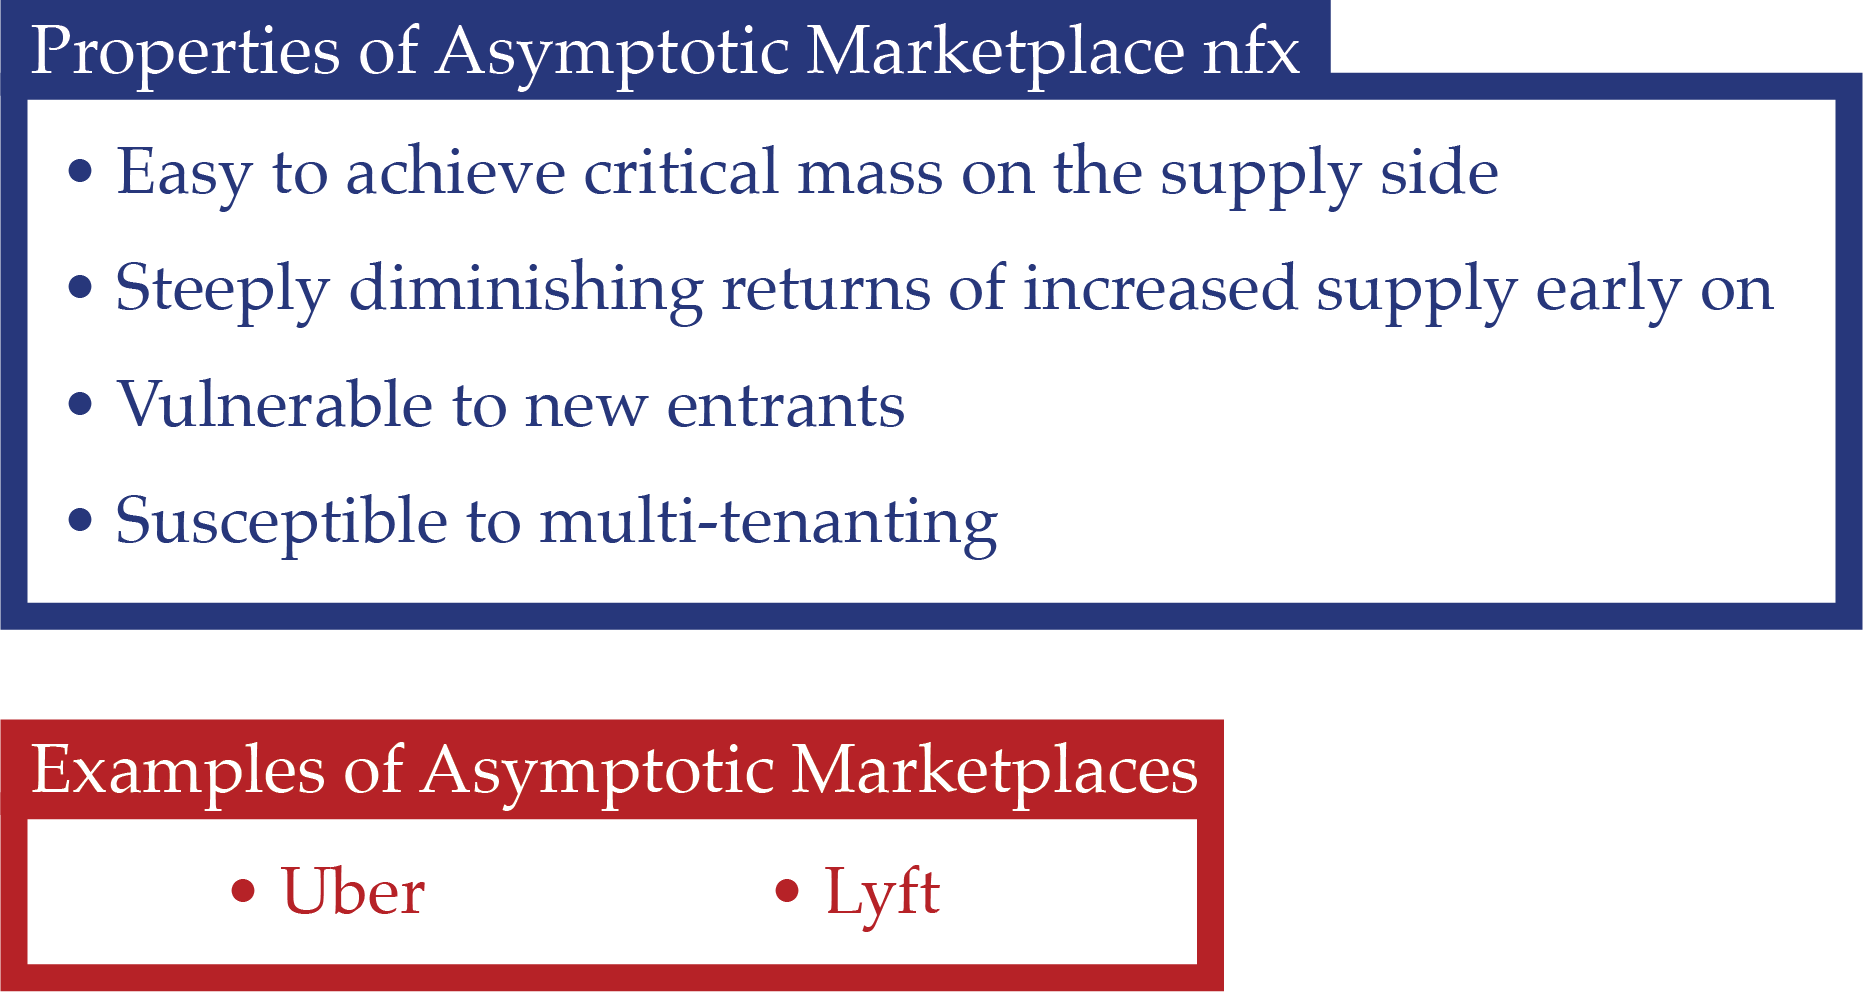 Properties and Example of Asymptotic Marketplace